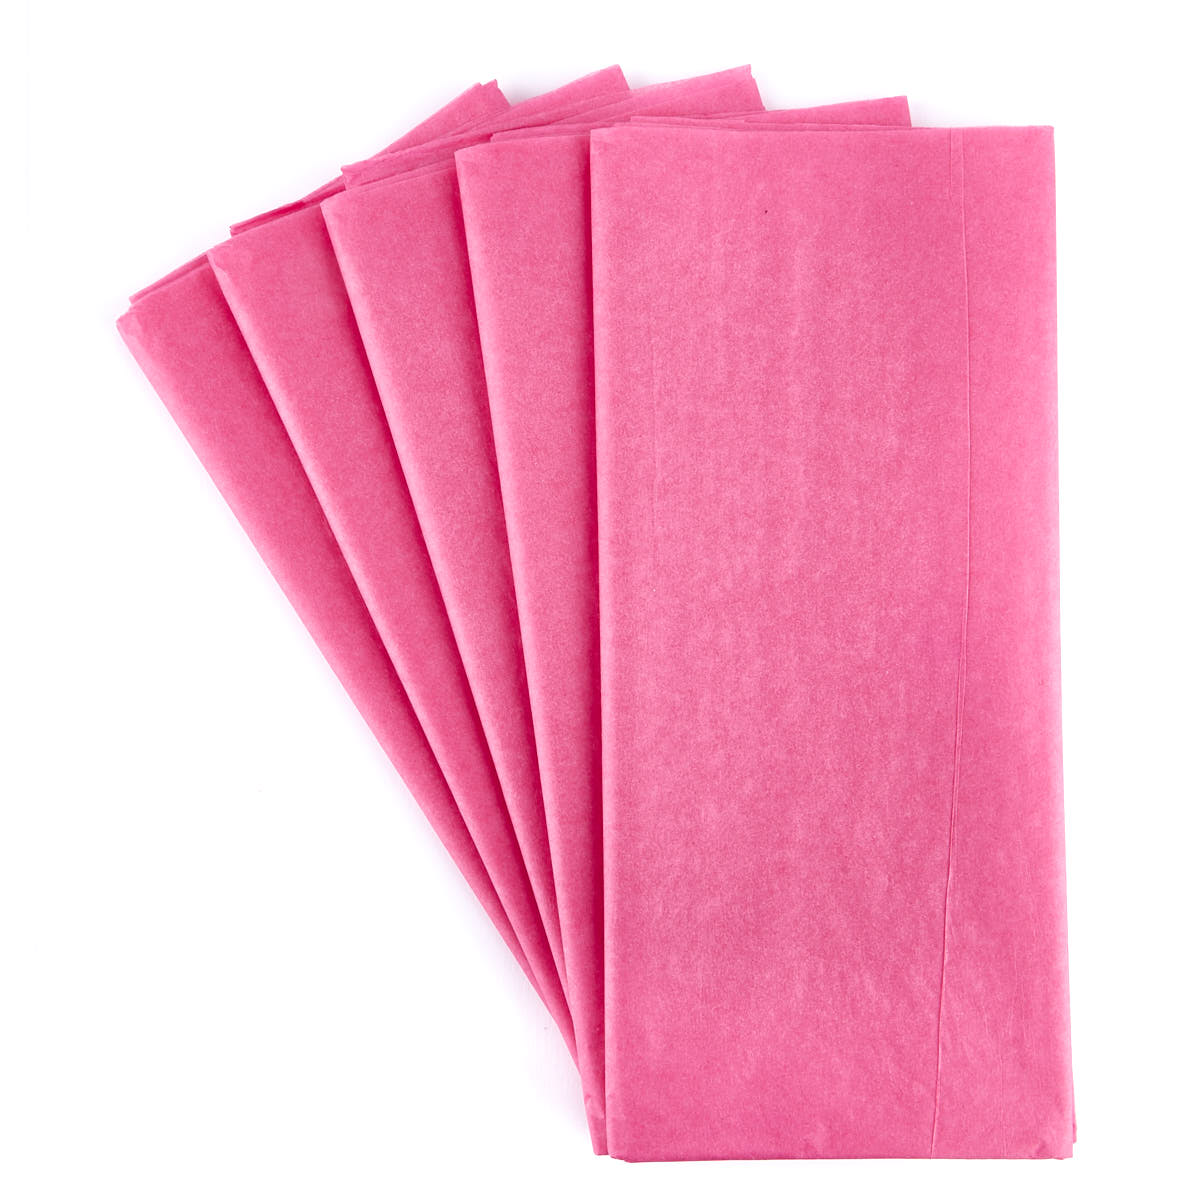 Pink Tissue Paper - 10 Sheets